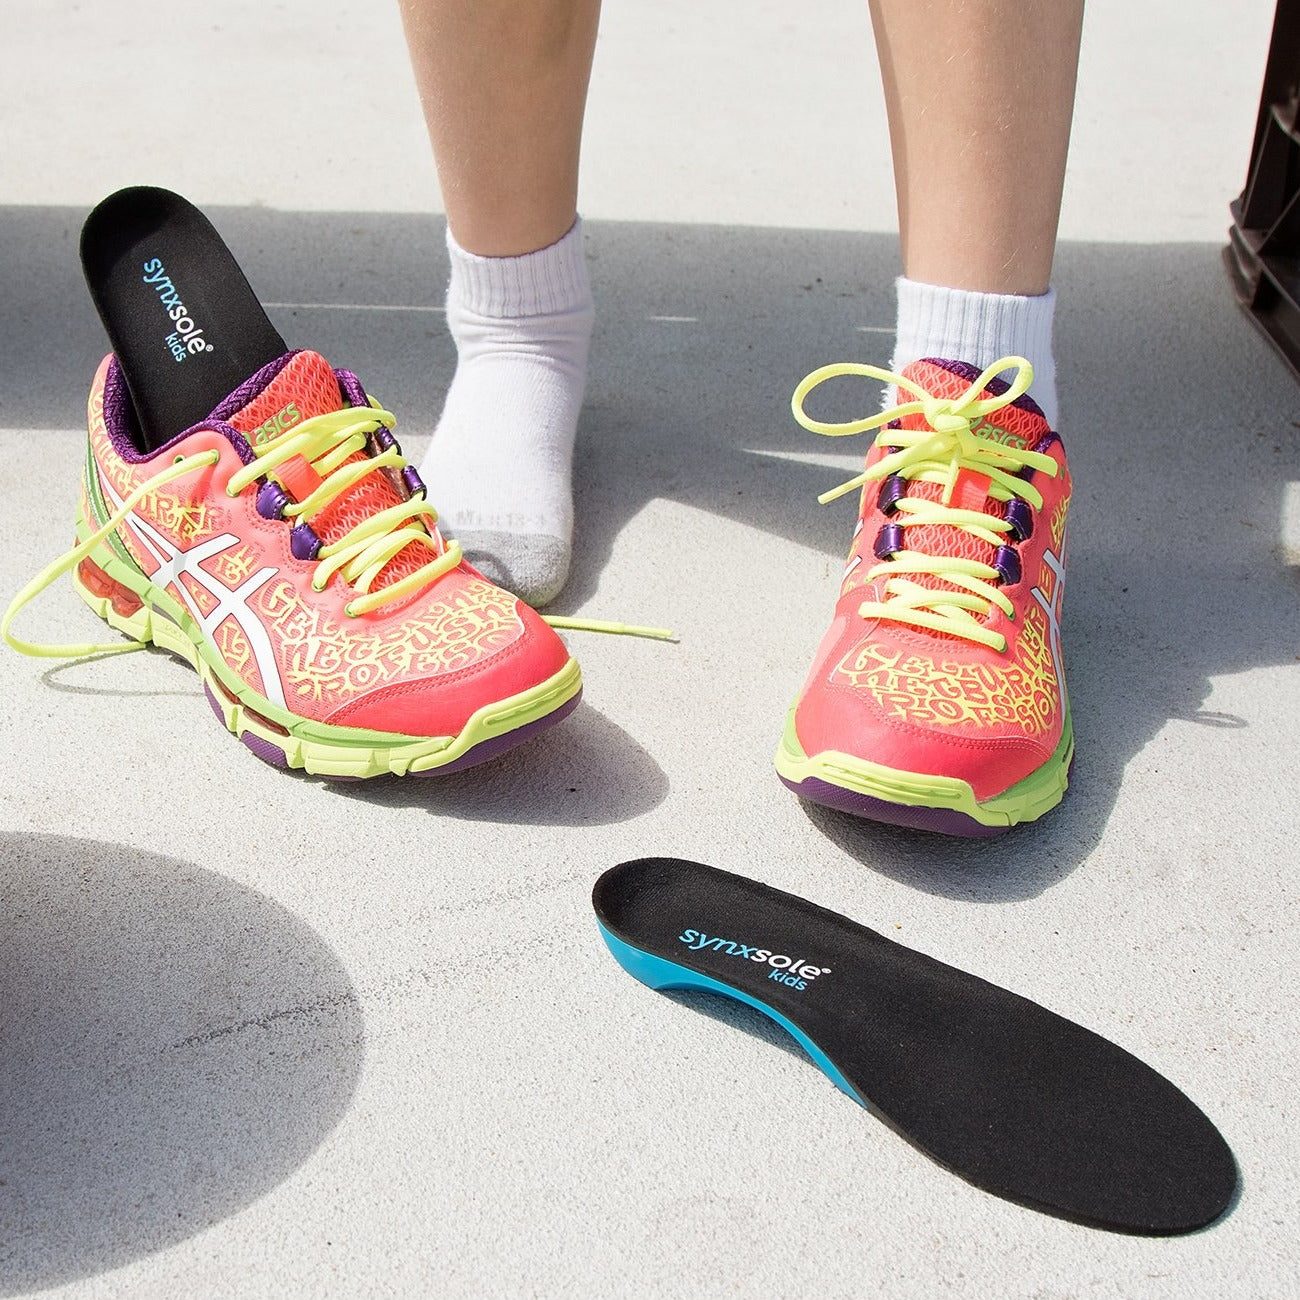 Synxsole Kids Insoles,severs disease, growing pains